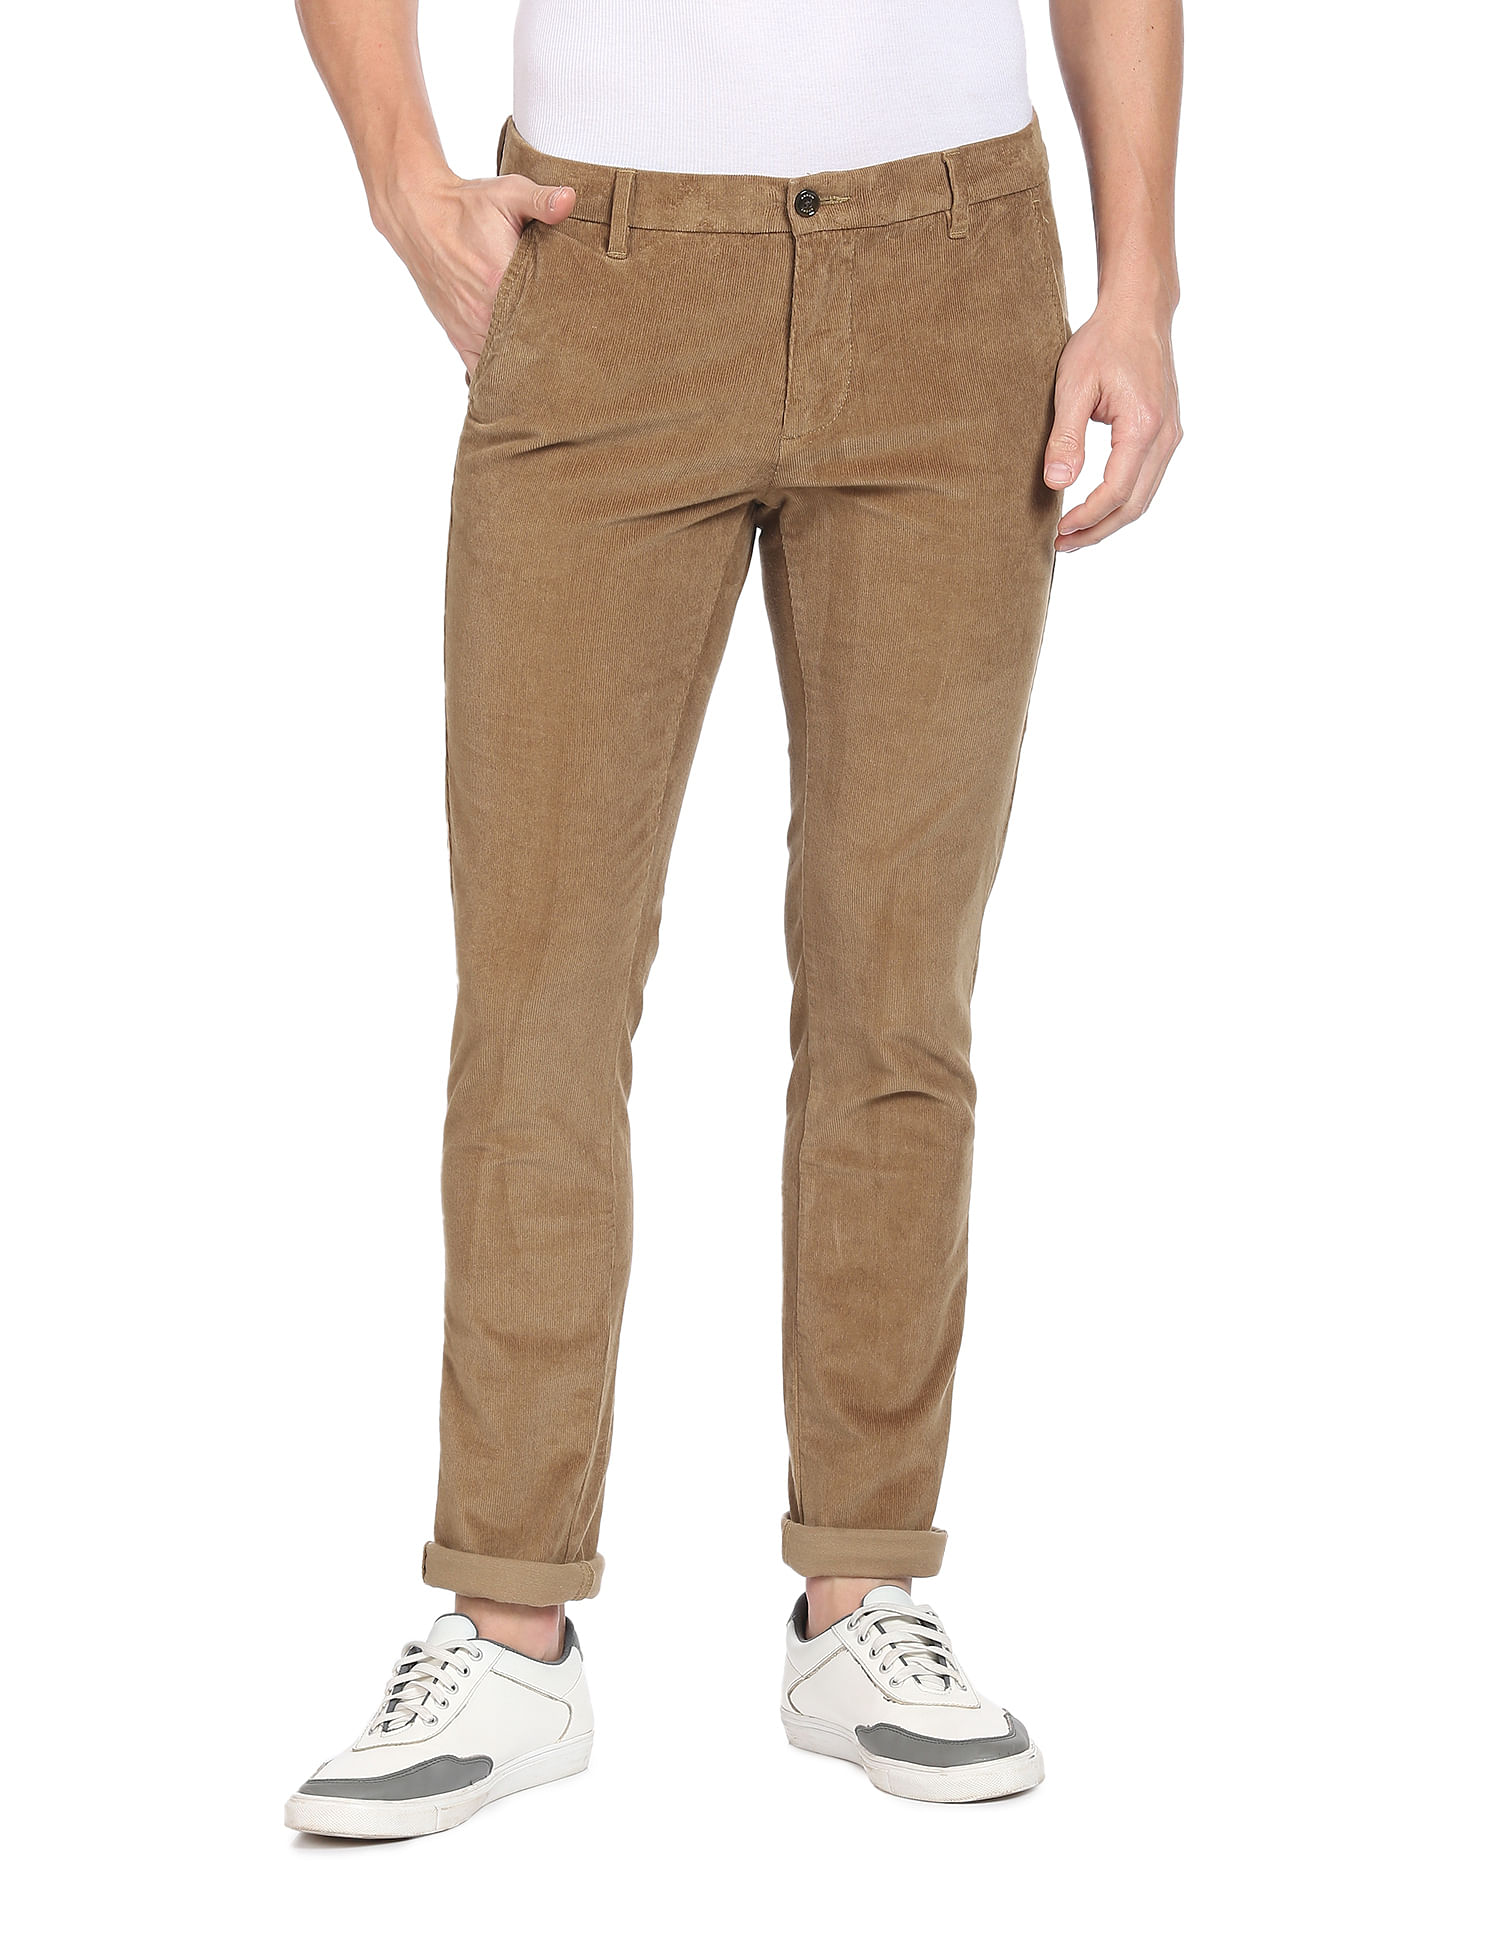 Buy GREY Trousers & Pants for Men by Byford by Pantaloons Online | Ajio.com